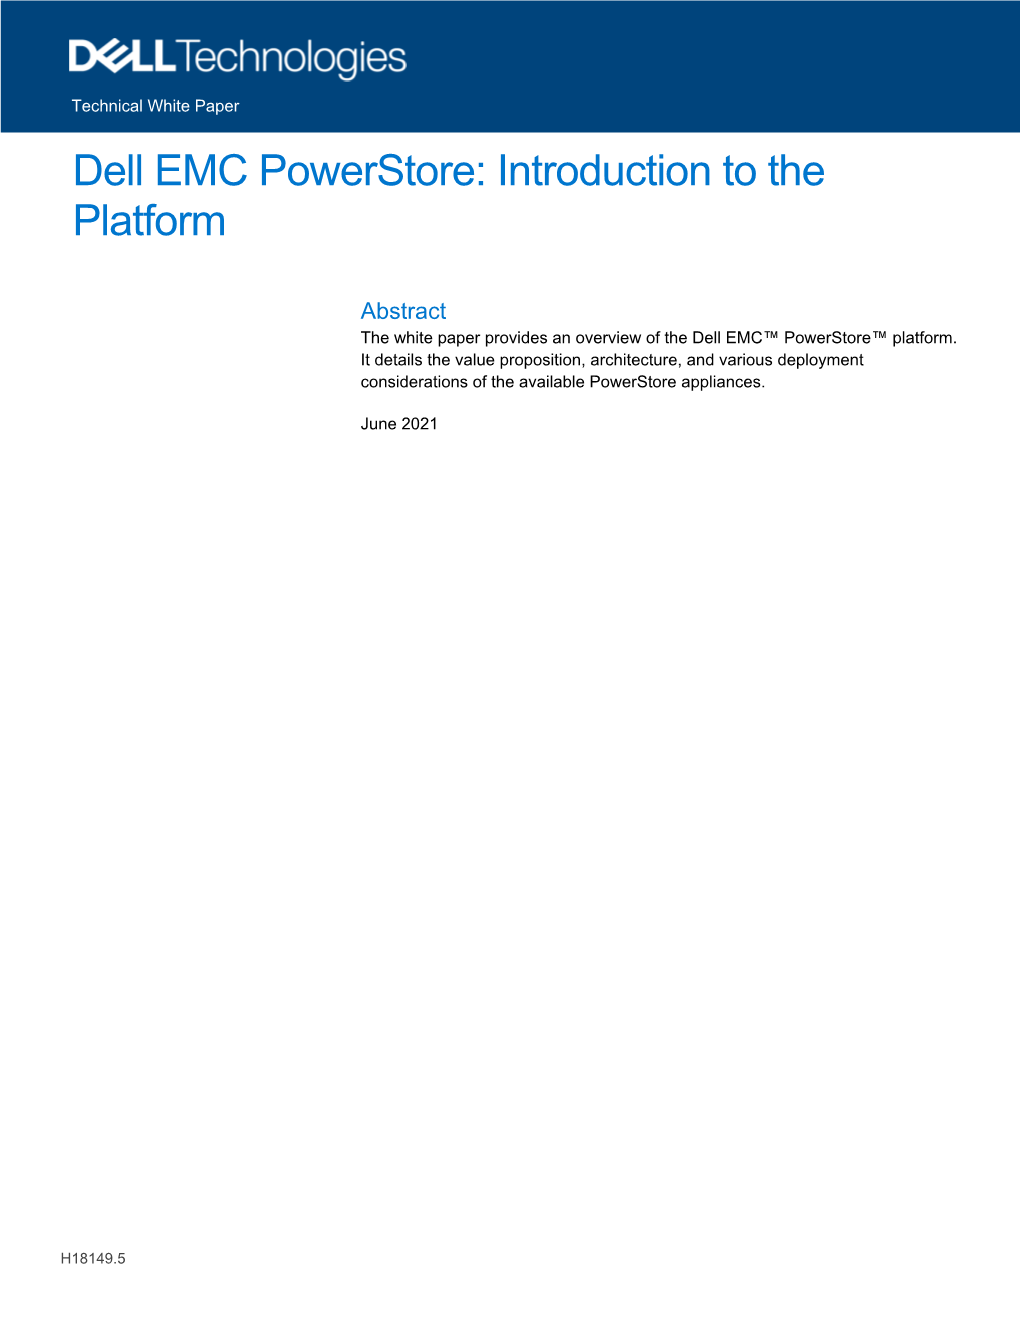 Dell EMC Powerstore: Introduction to the Platform